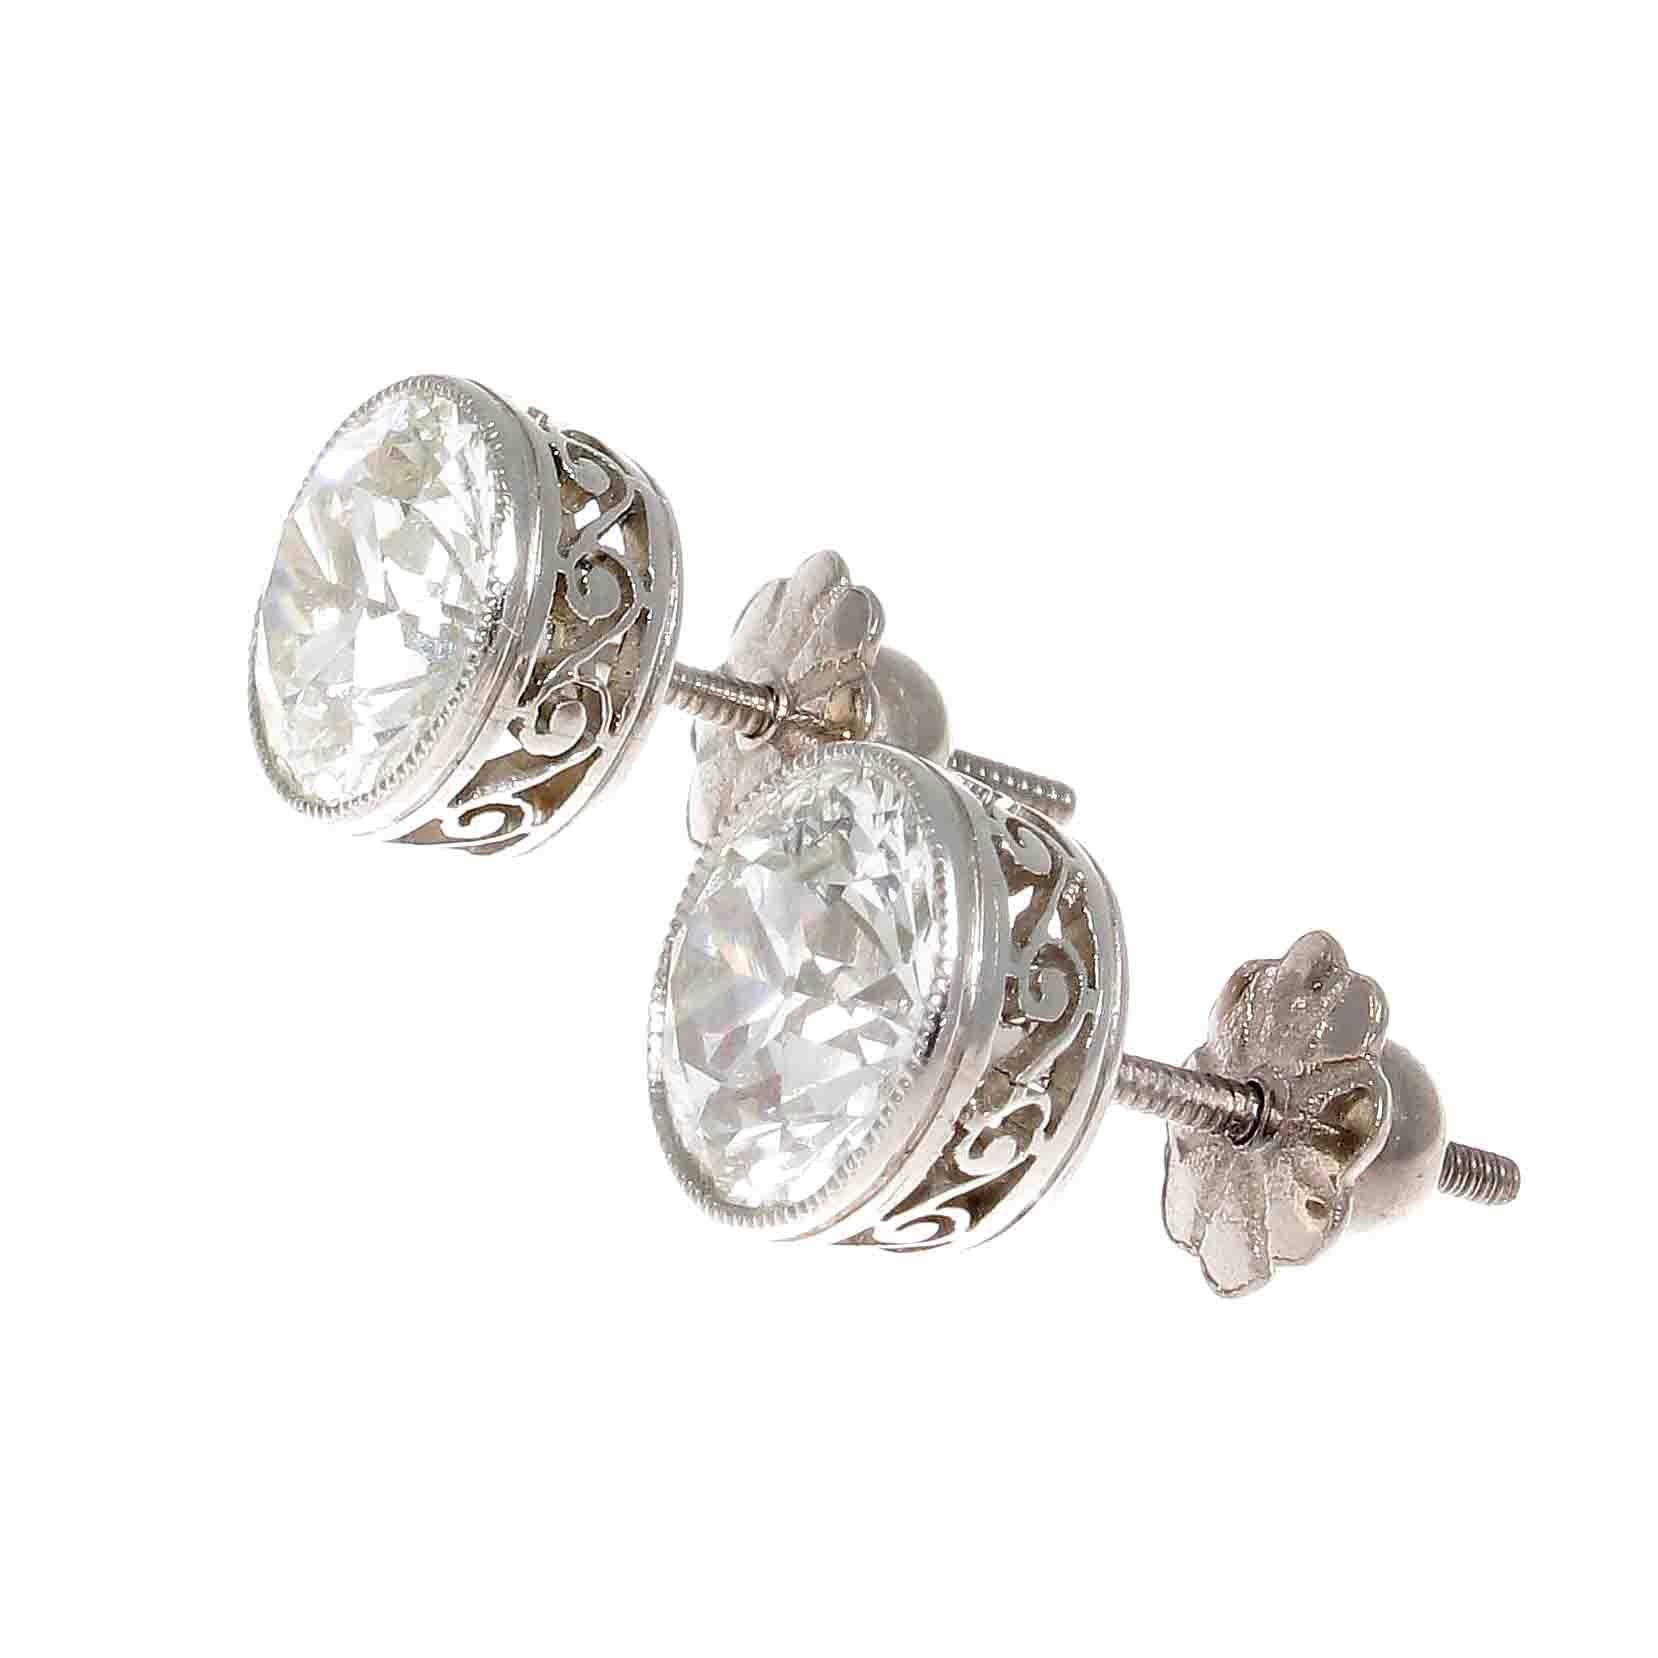 Large diamond stud earrings expertly cut to maximize the diamonds sparkle. Either at evening functions or just out and about in jeans in the afternoon these earrings will be appreciation from onlookers. Featuring two old European cut diamonds that